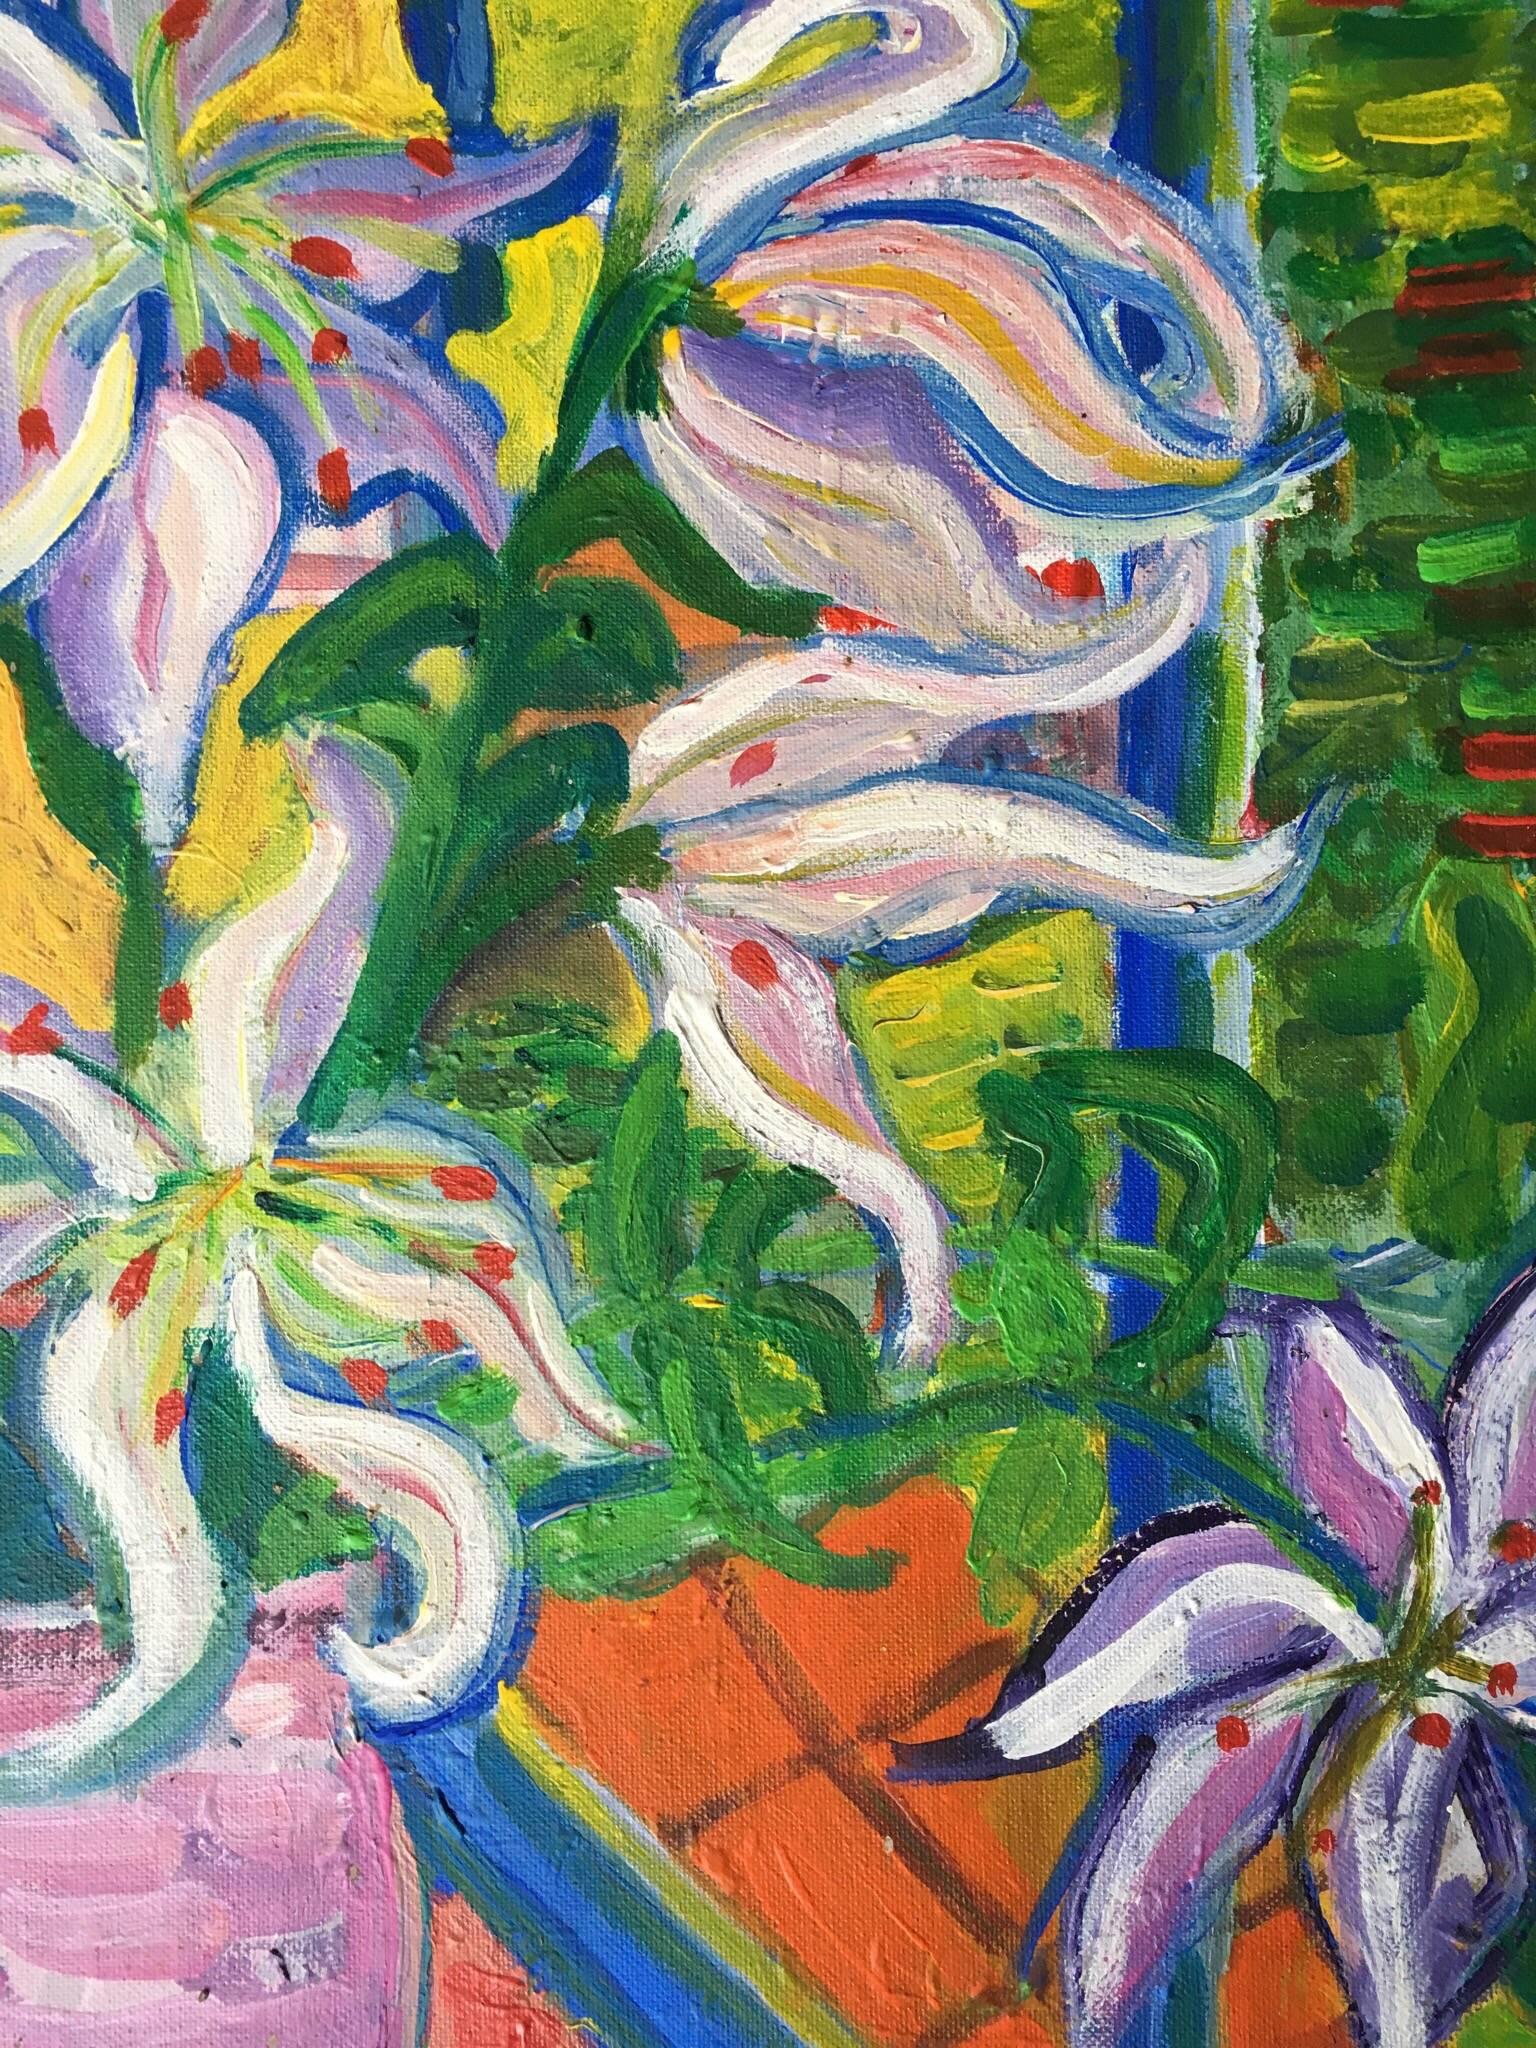 Abstract Vase of Lilies, Colourful Oil Painting
by Pamela Cawley, British 20th century
oil painting on board, unframed
board: 20 x 16 inches 

Stunning original Impressionist oil painting by the 20th century British artist, Pamela Cawley. The work